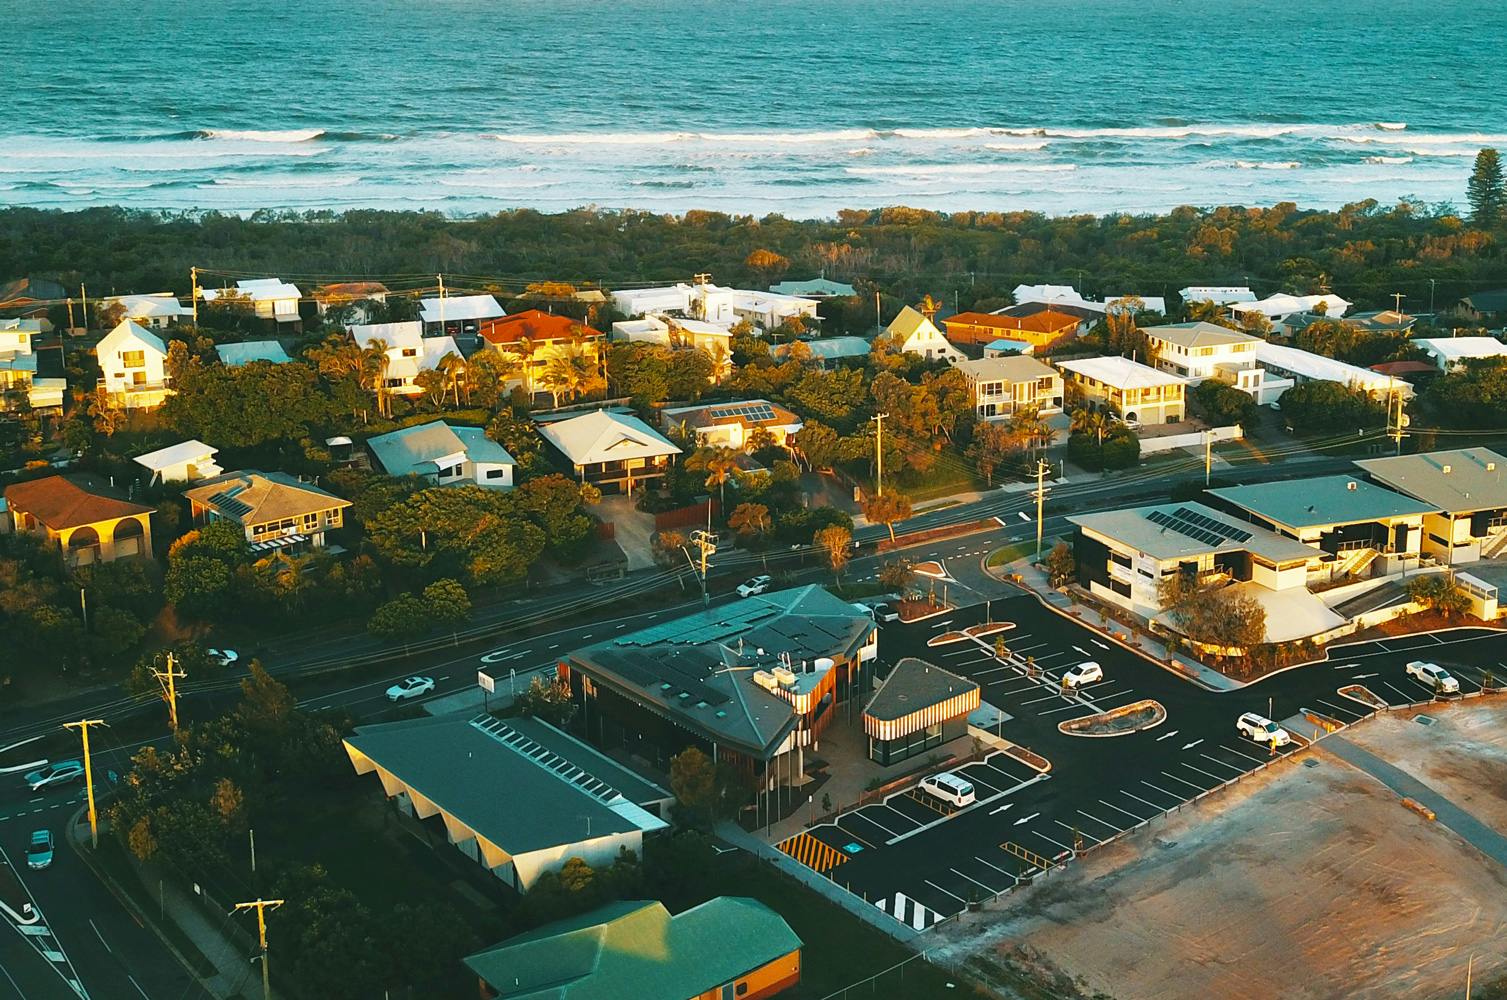 Hub from the air showing beach location